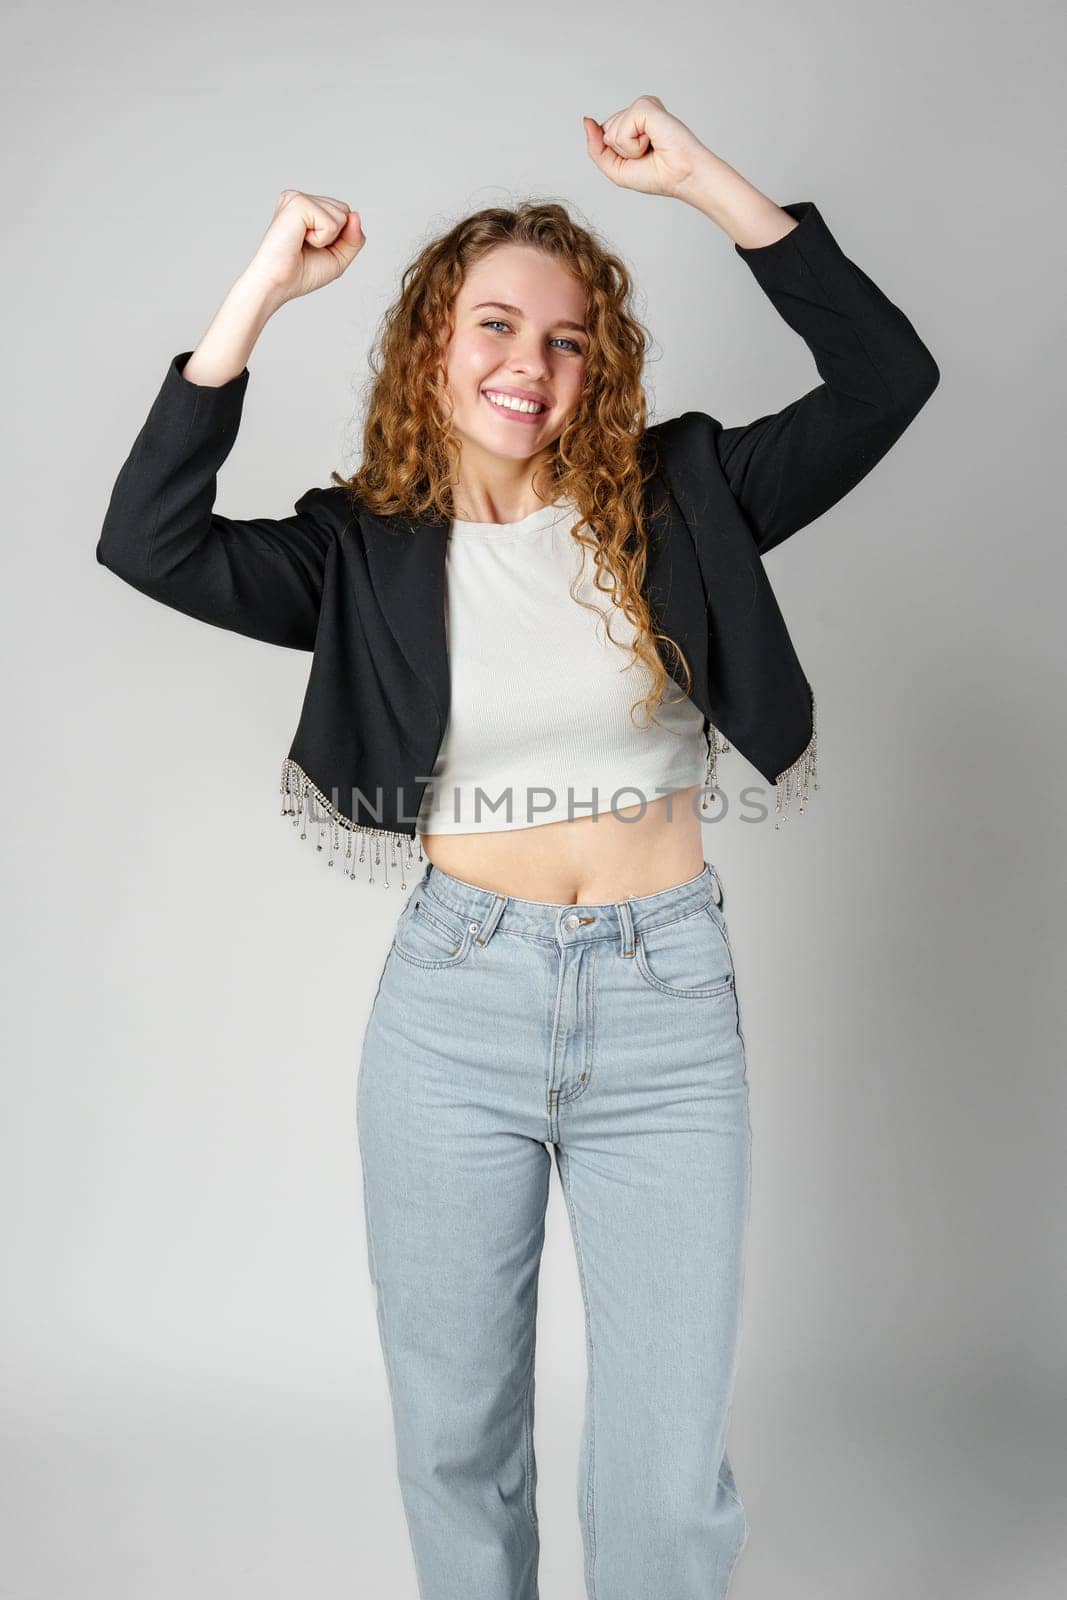 Joyful Young Woman Dancing Alone in Light-Colored Casual Attire Against a Grey Background close up